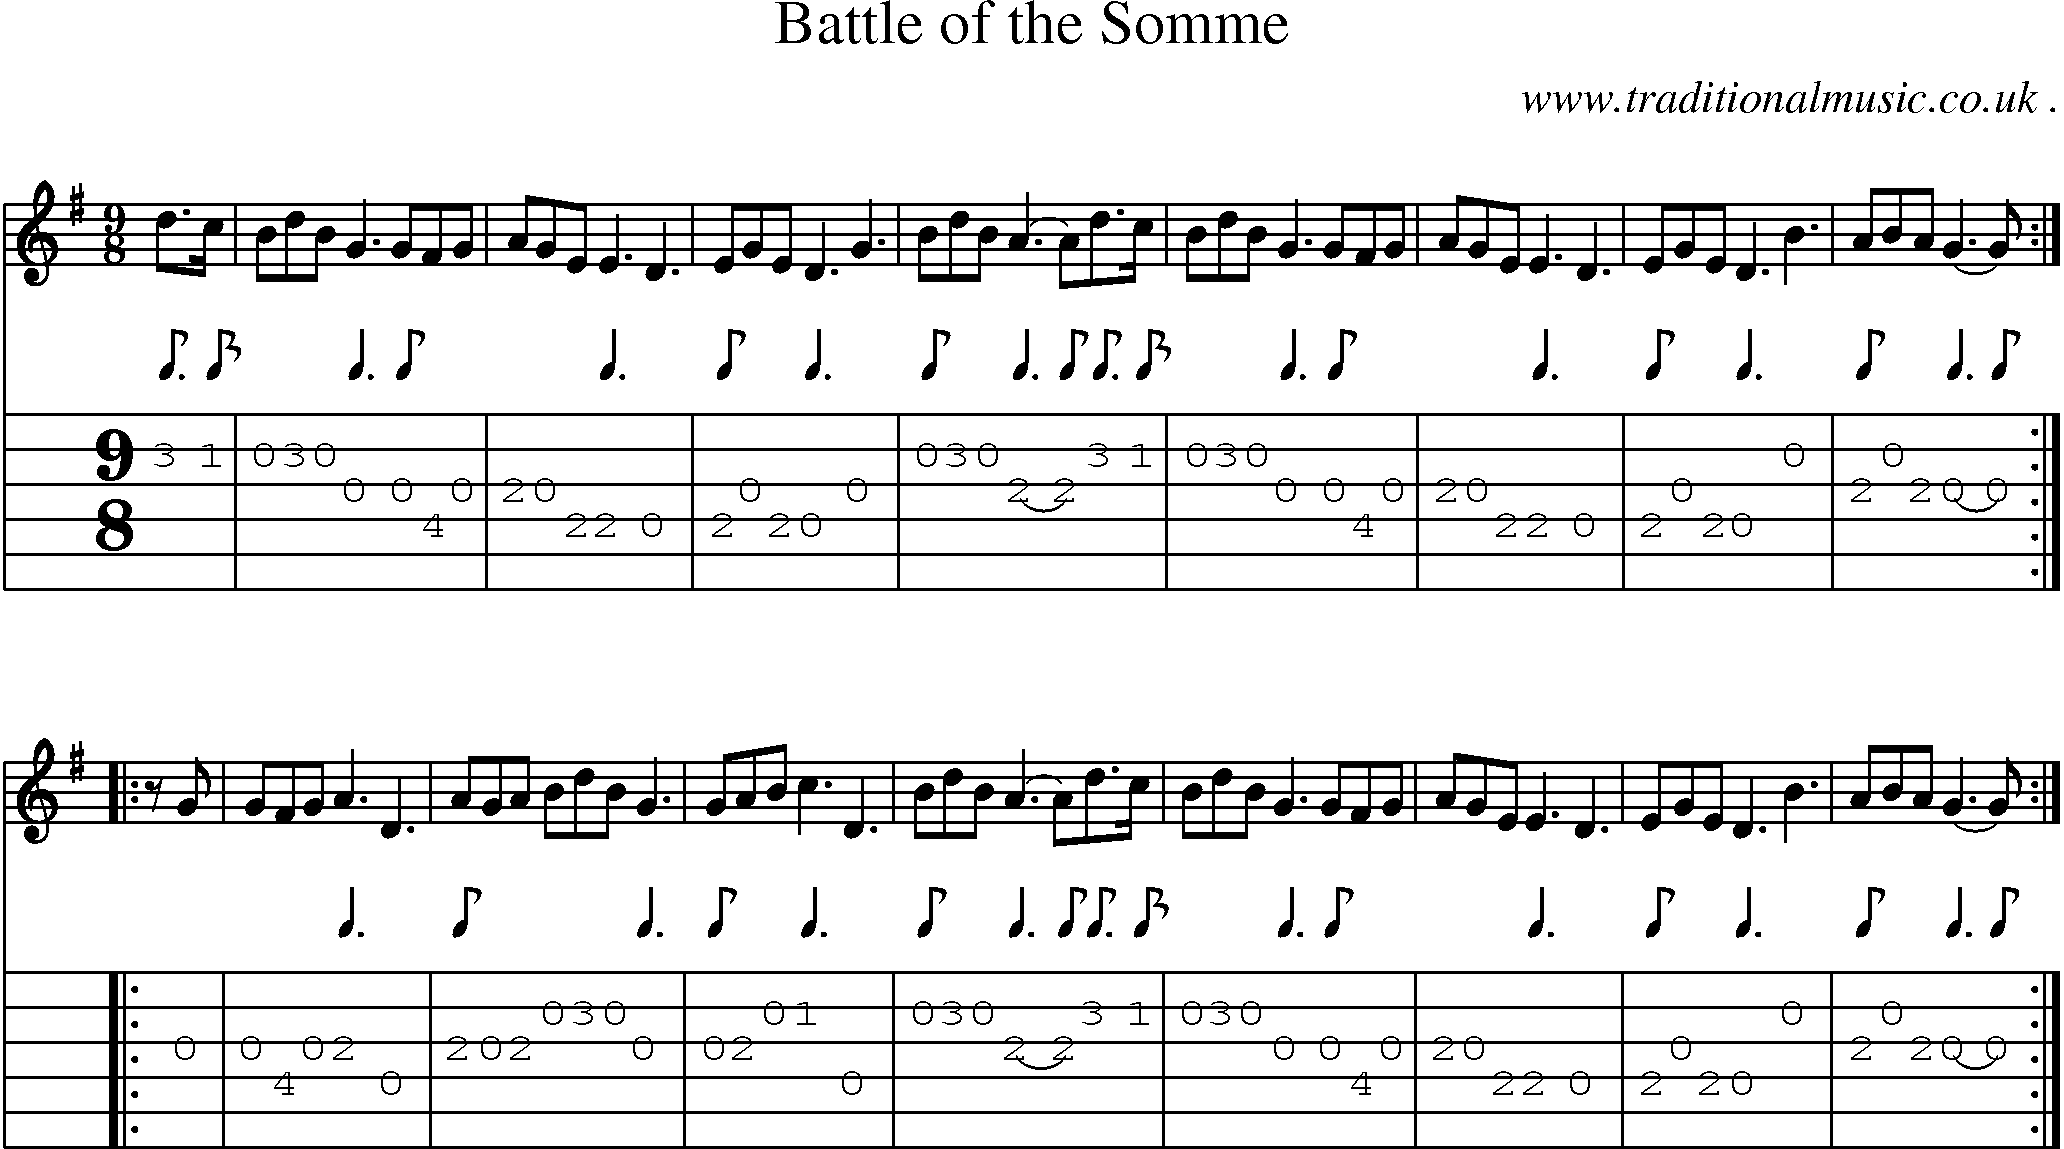 Sheet-music  score, Chords and Guitar Tabs for Battle Of The Somme